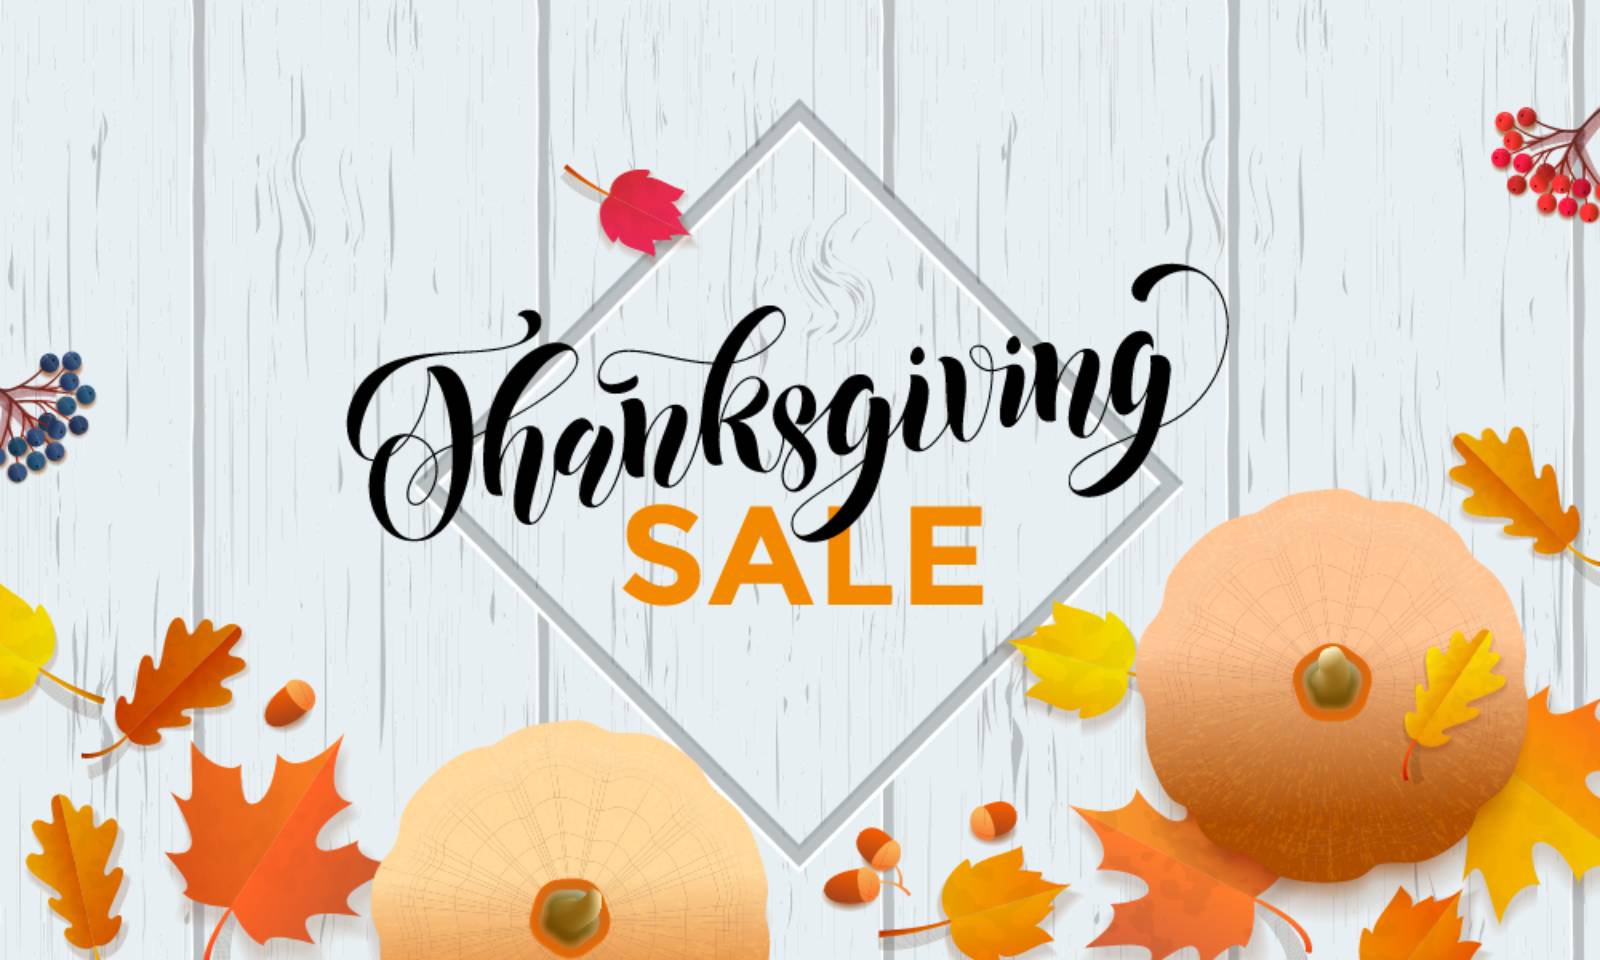 2022 Annual Thanksgiving Proposal Training Sale